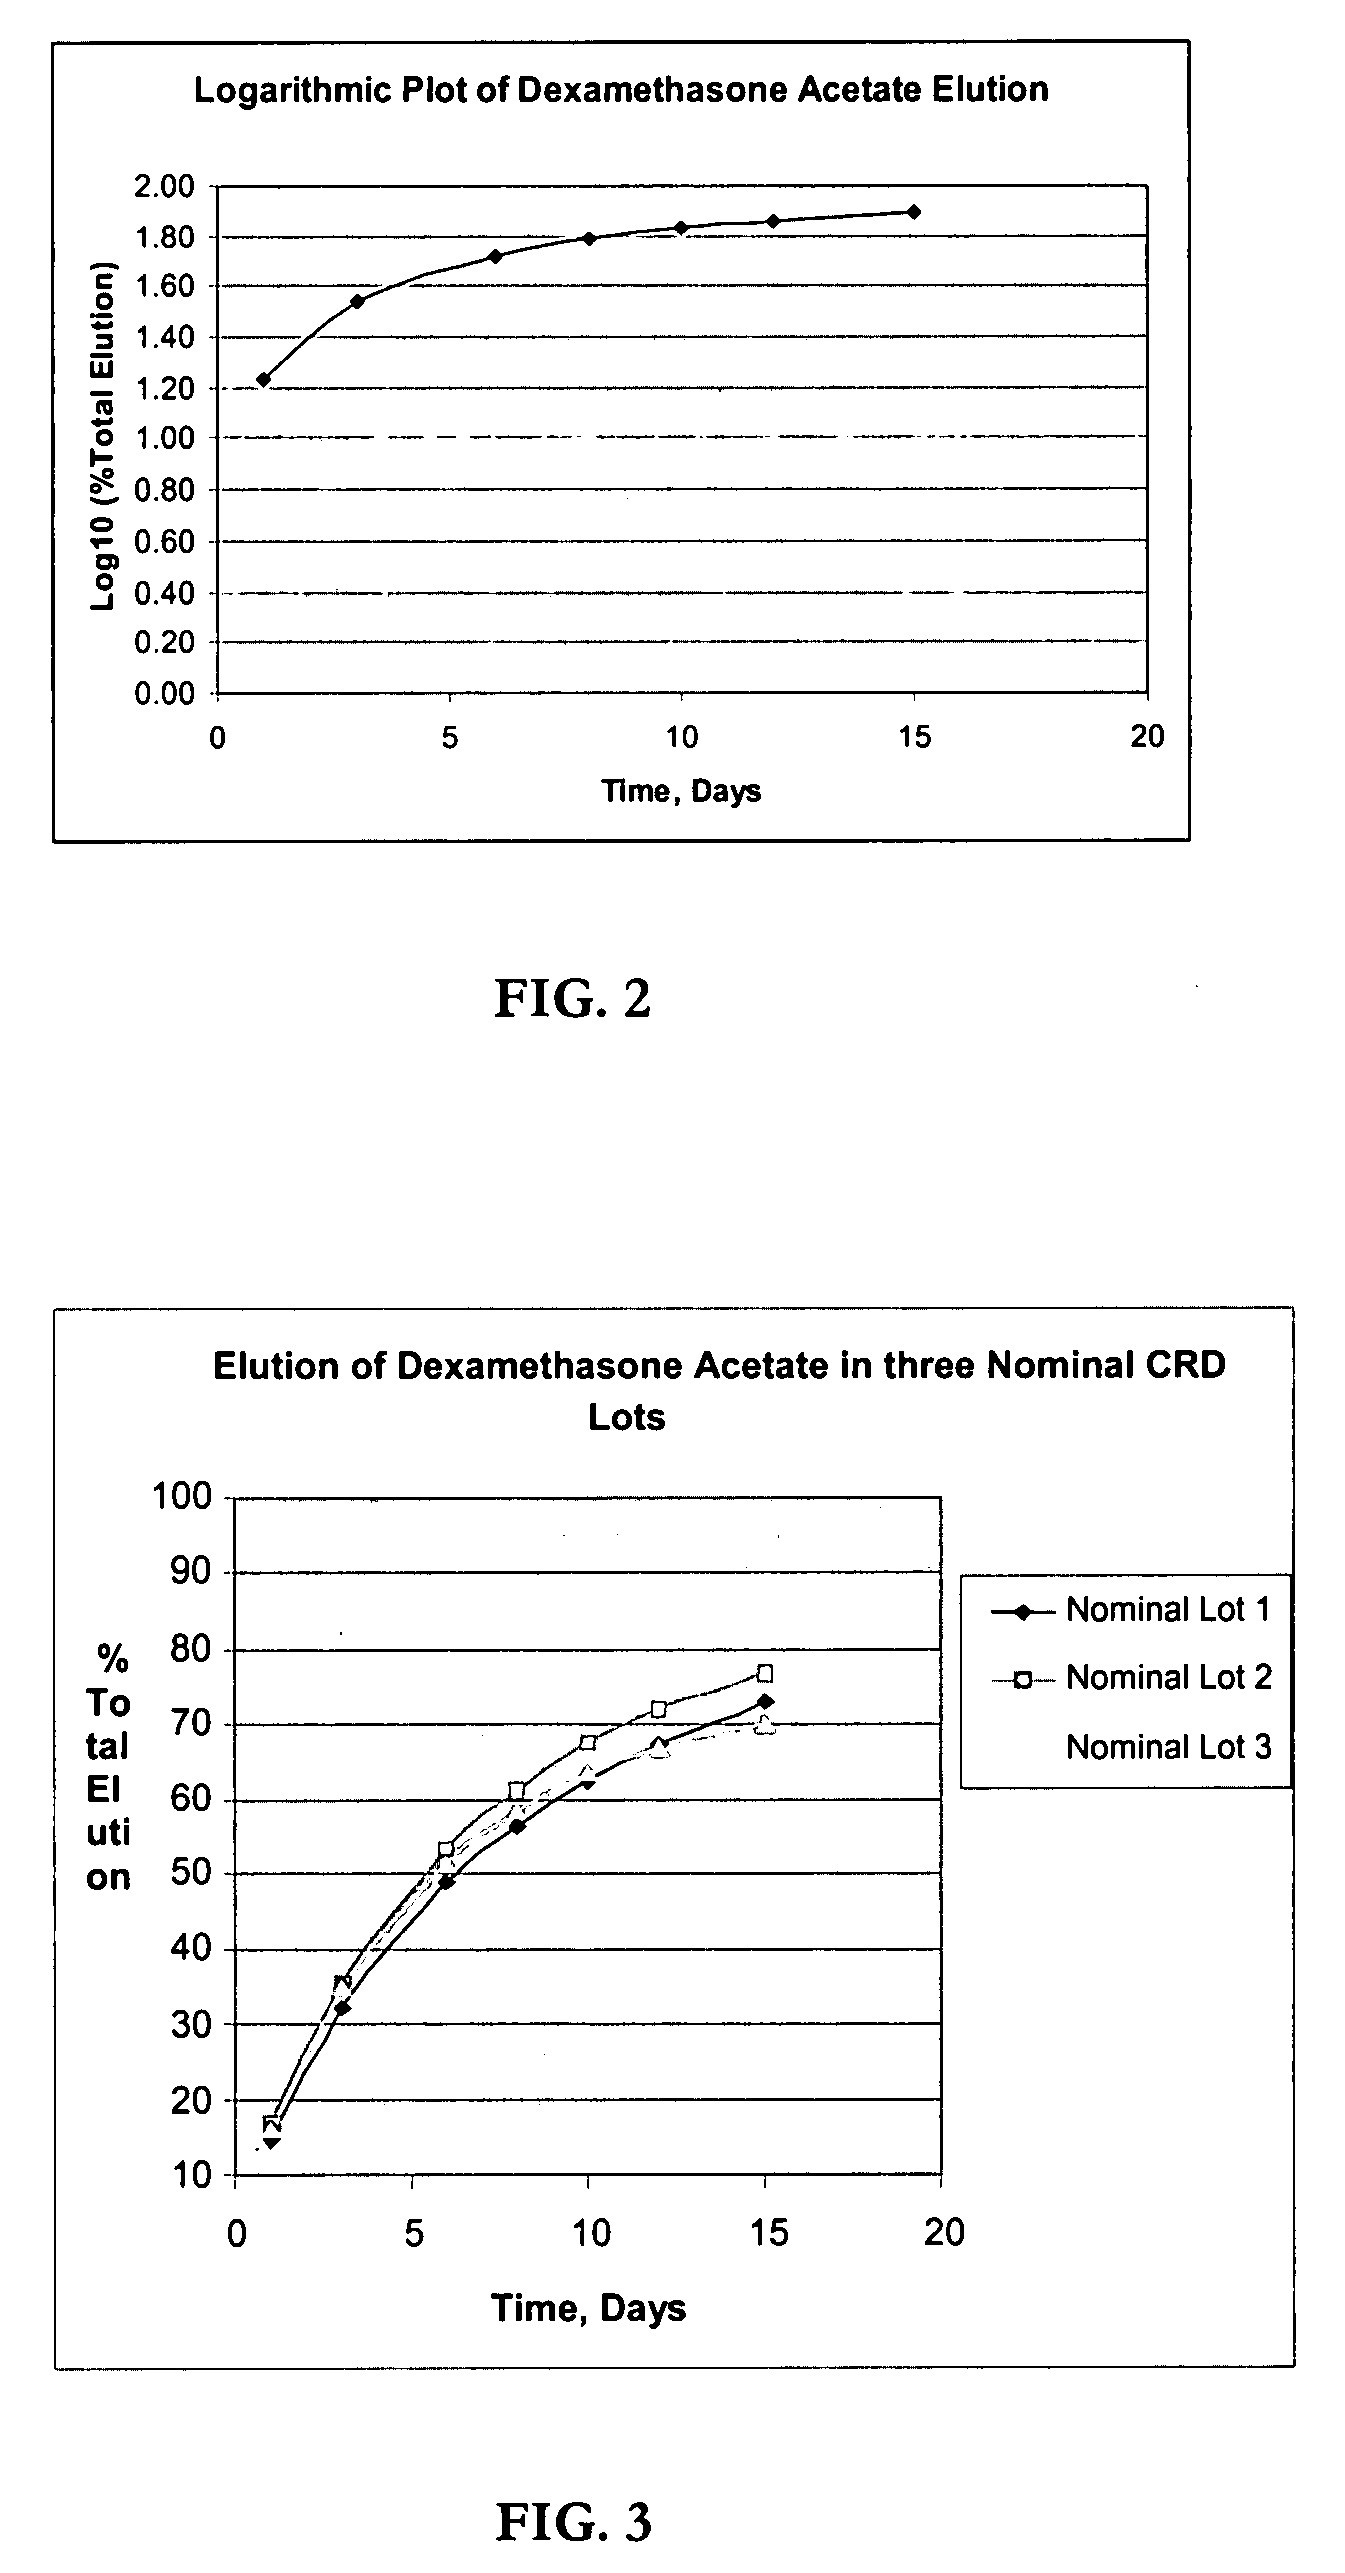 Apparatuses and media for drug elution and methods for making and using them